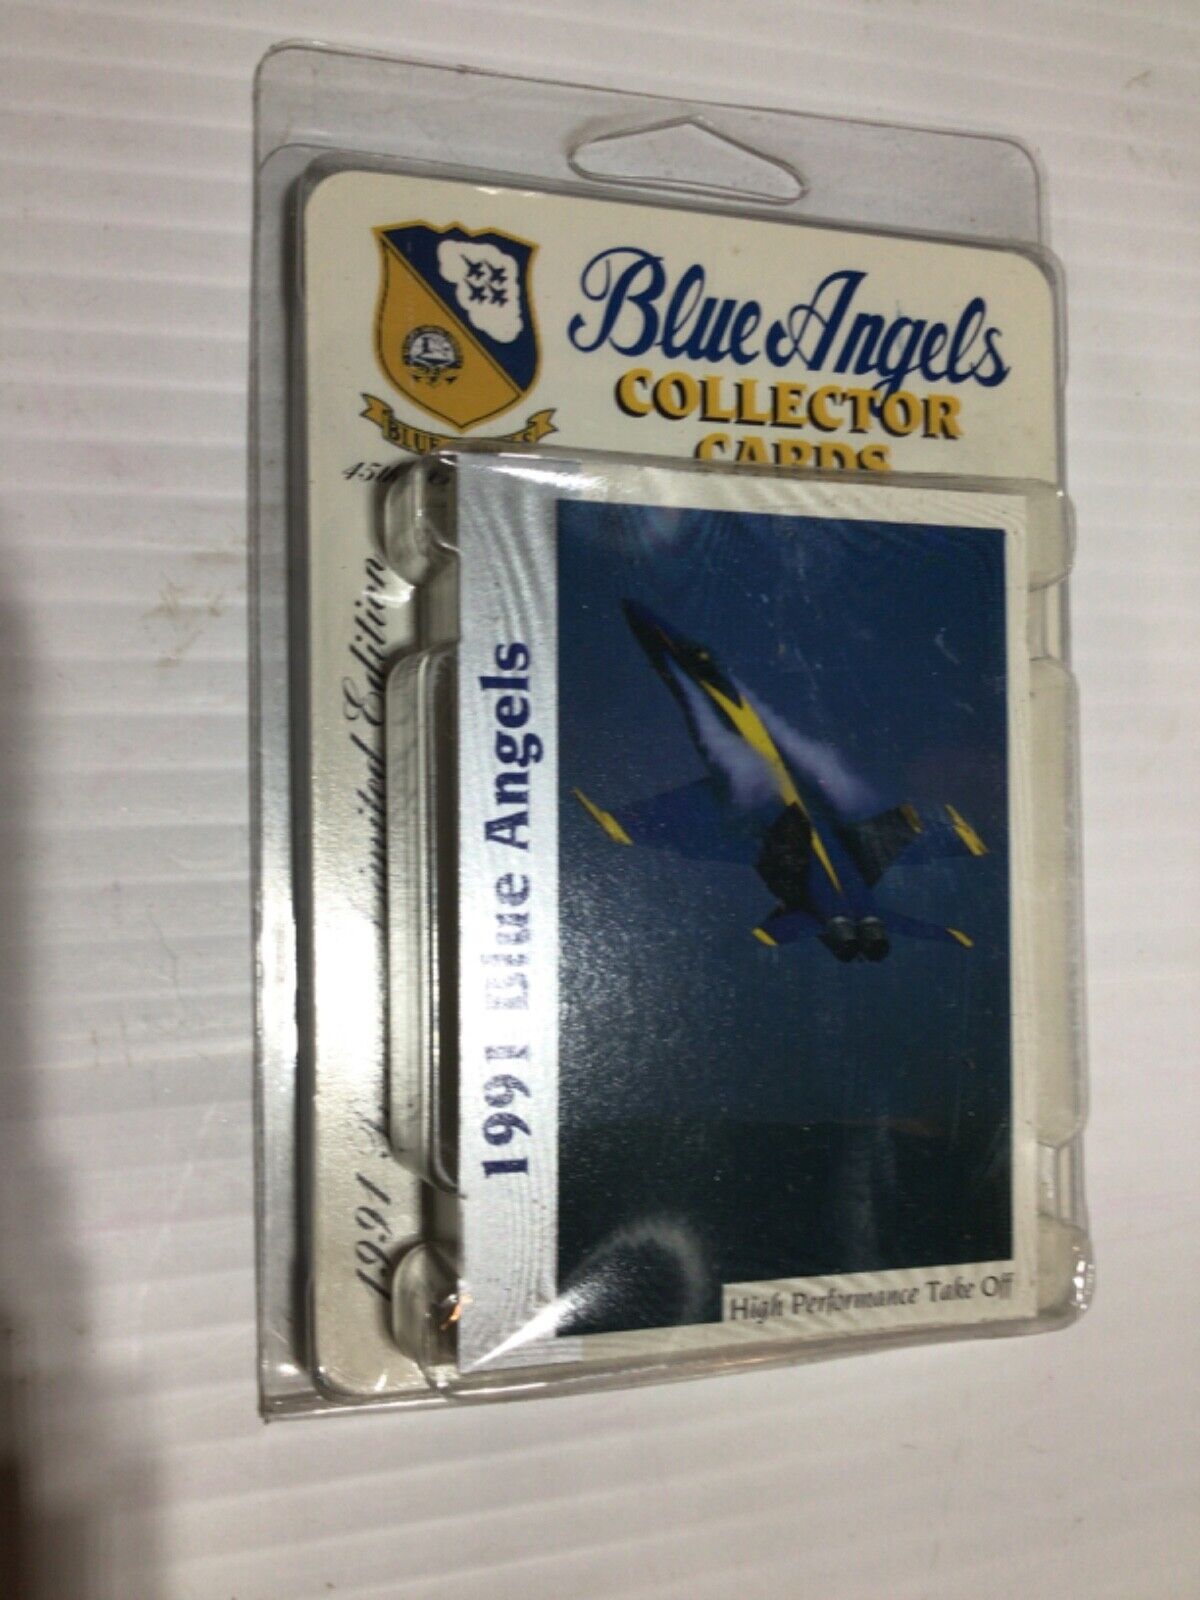 Blue Angels 1991 Limited Edition Collector Cards 21 Card Set (2 sets of 21)